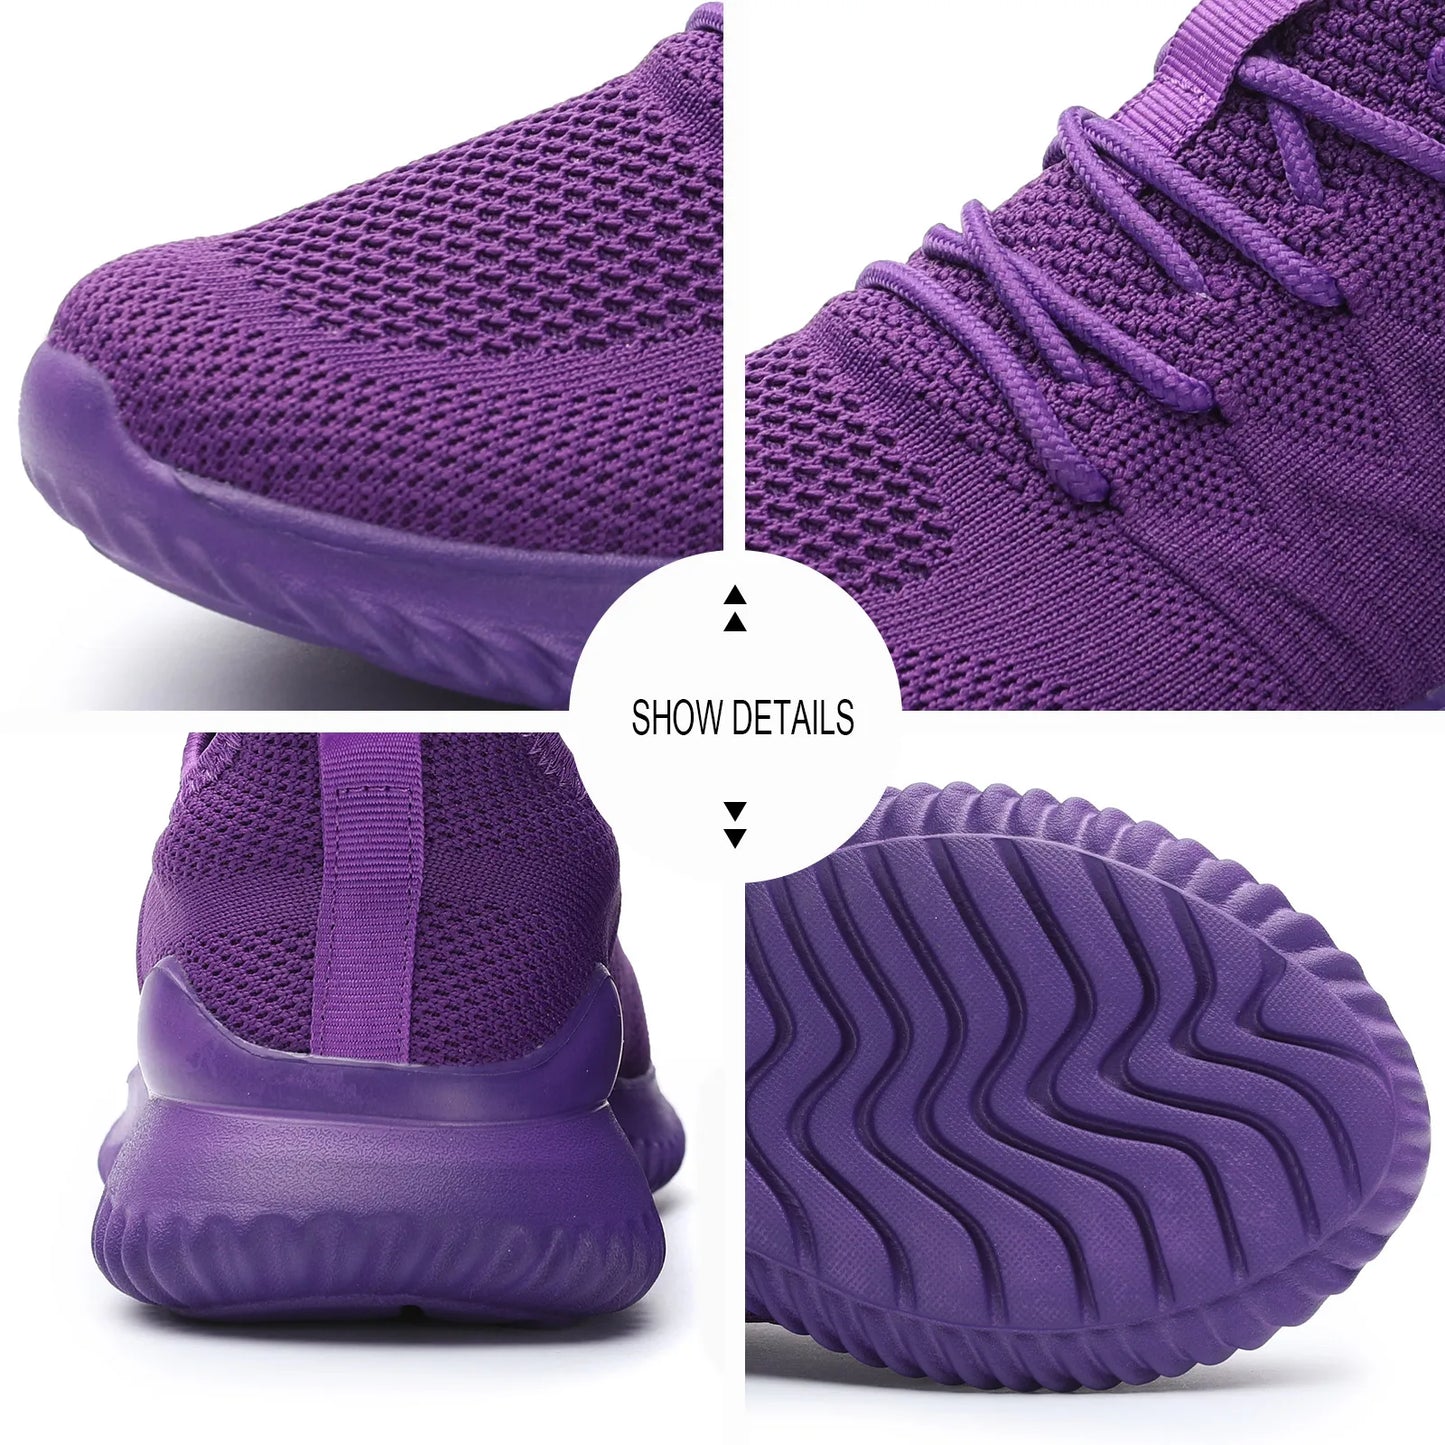 Women's Running Shoes Ladies Slip on Tennis Walking Sneakers Lightweight Breathable Comfortable Work Gym Trainers Stylish Shoes